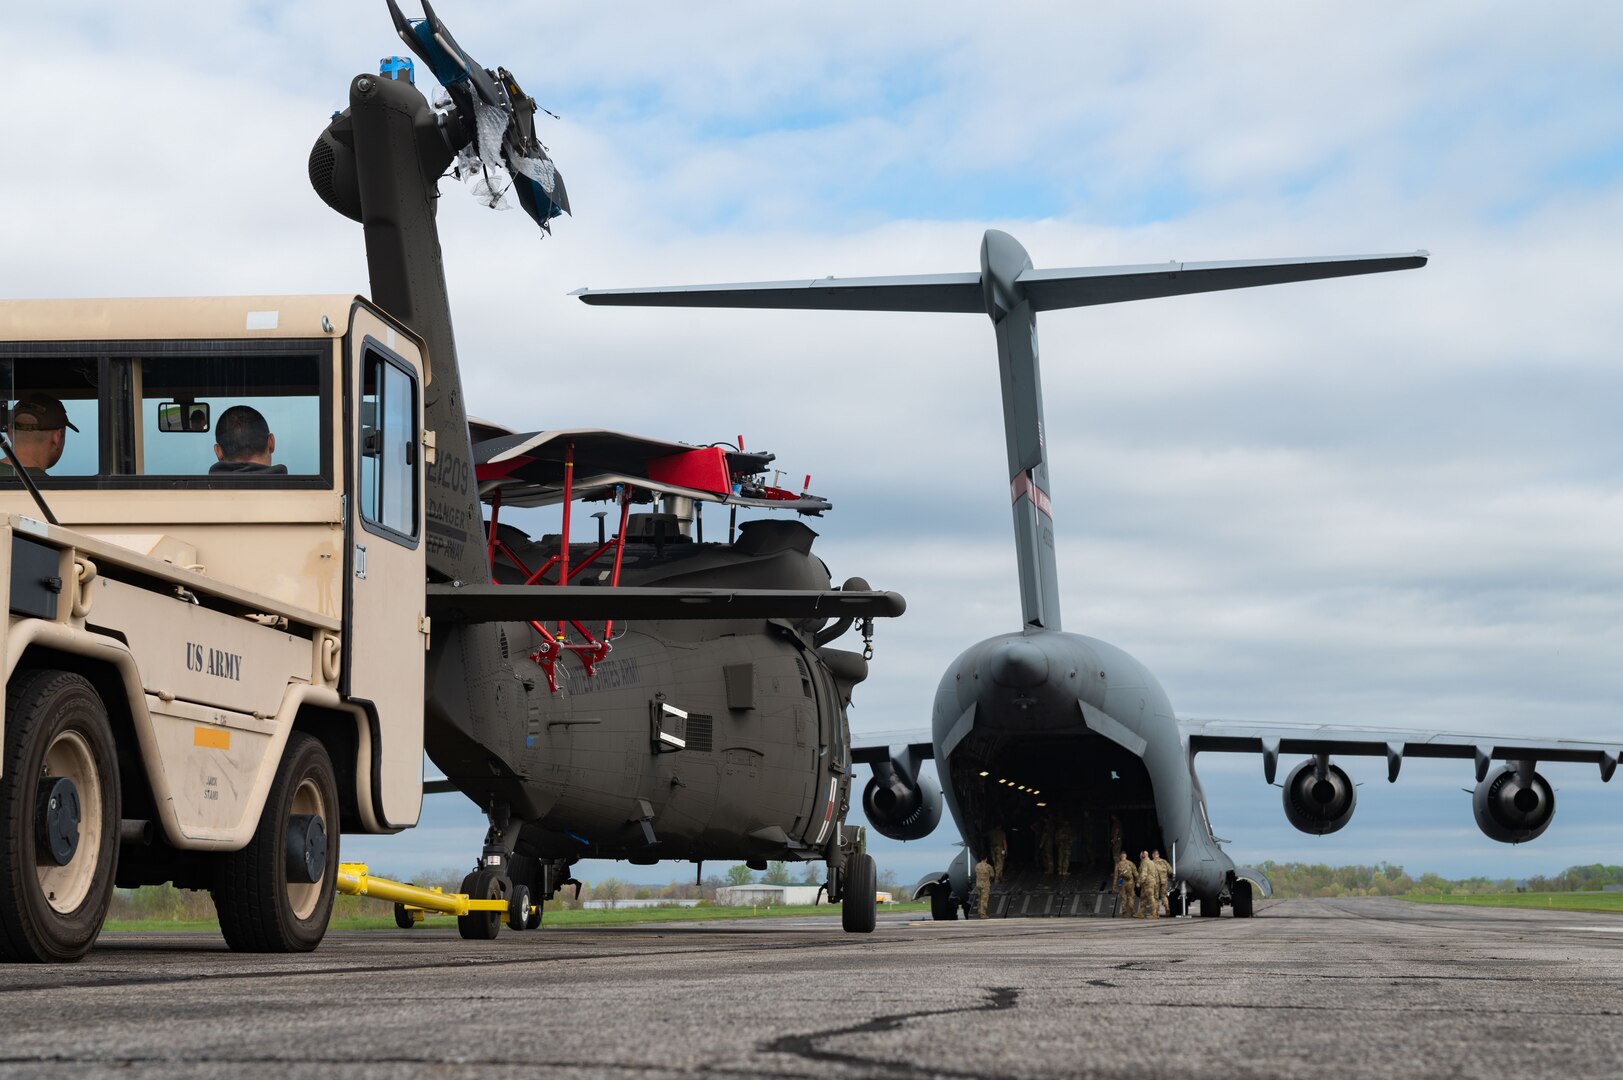 a helicopter and aircraft are parked on a flightline